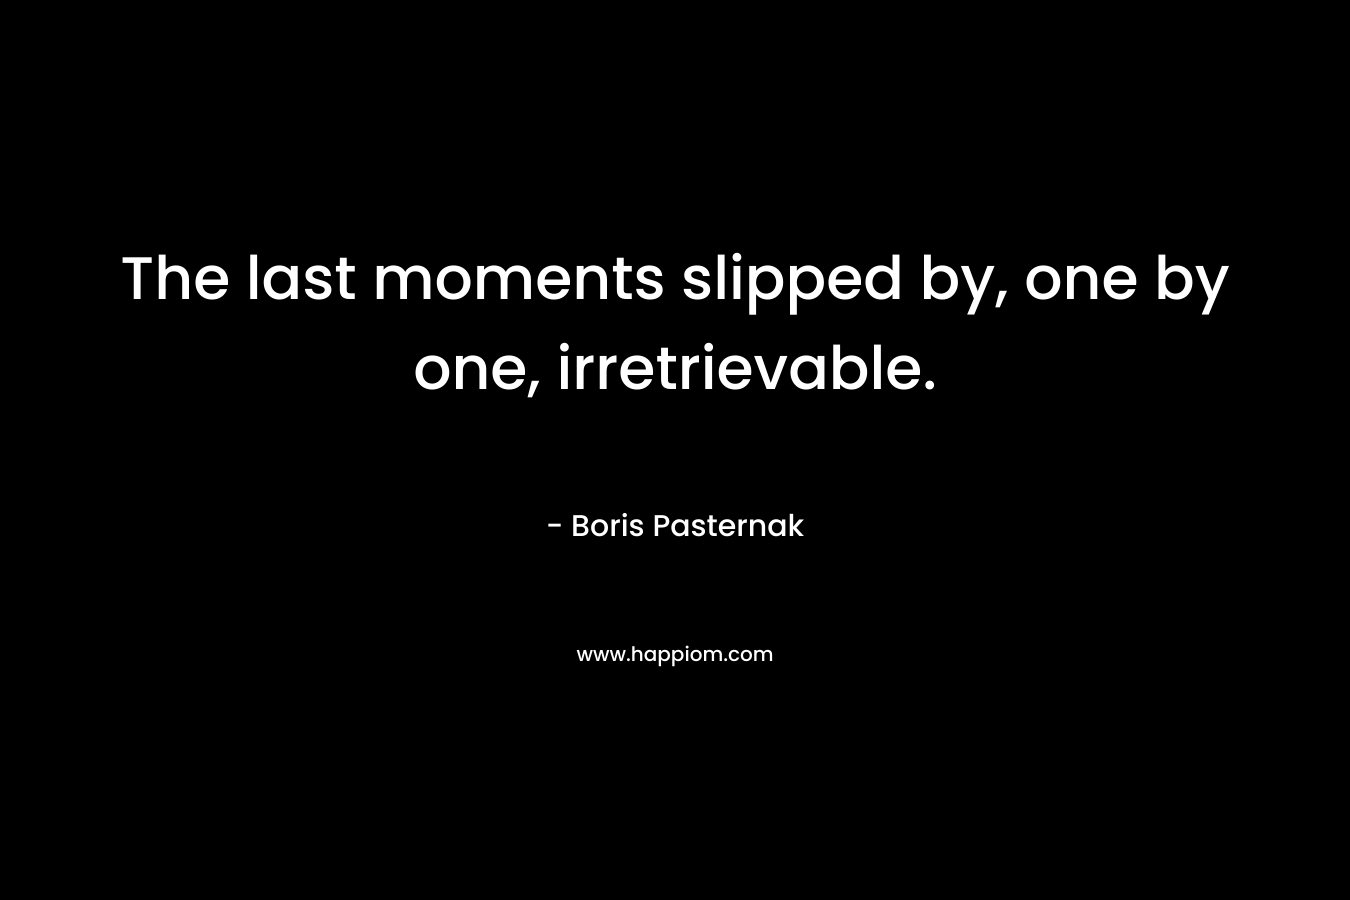 The last moments slipped by, one by one, irretrievable. – Boris Pasternak